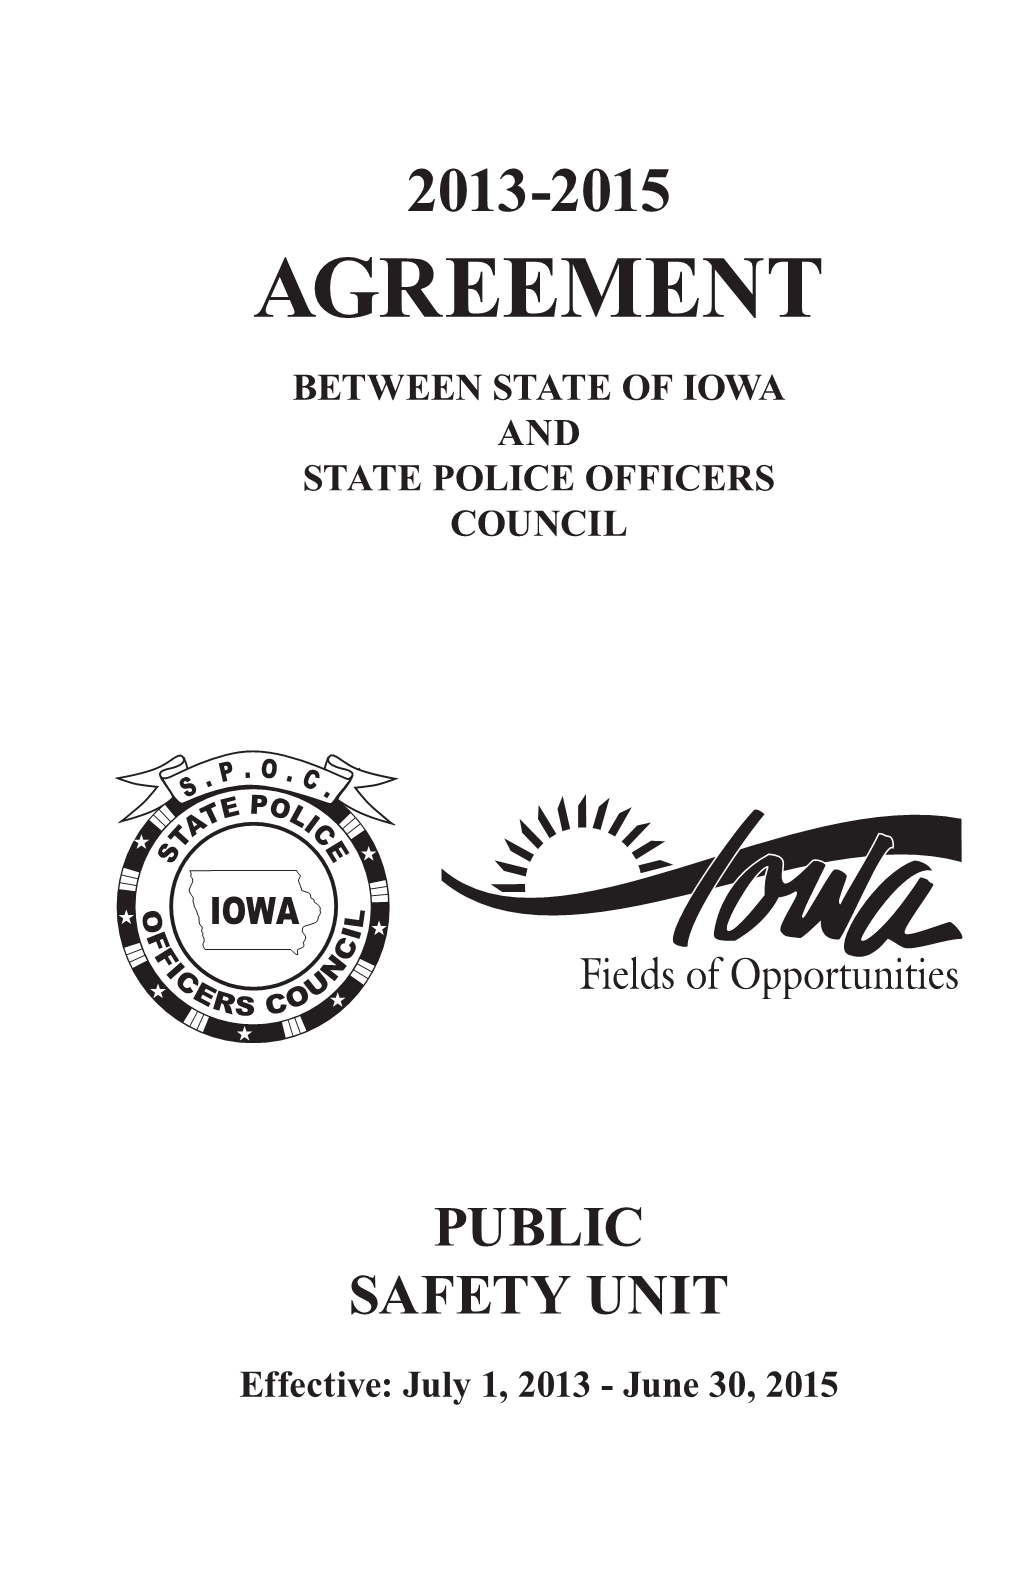 Agreement Between State of Iowa and State Police Officers Council